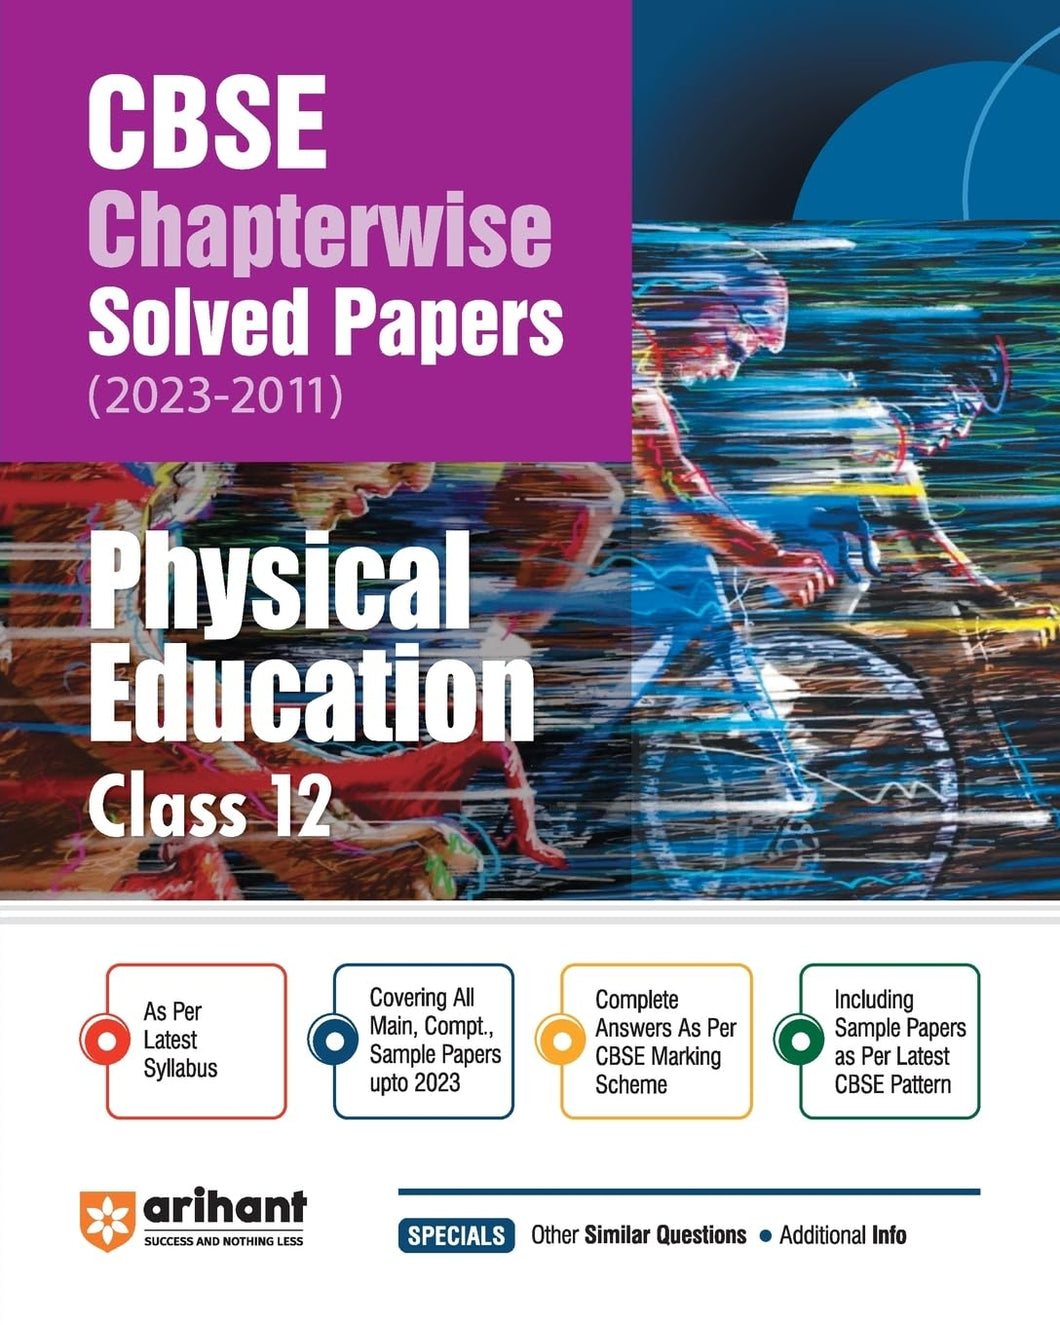 Arihant CBSE Chapterwise Solved Papers 2023-2011 Physical Education Class 12th